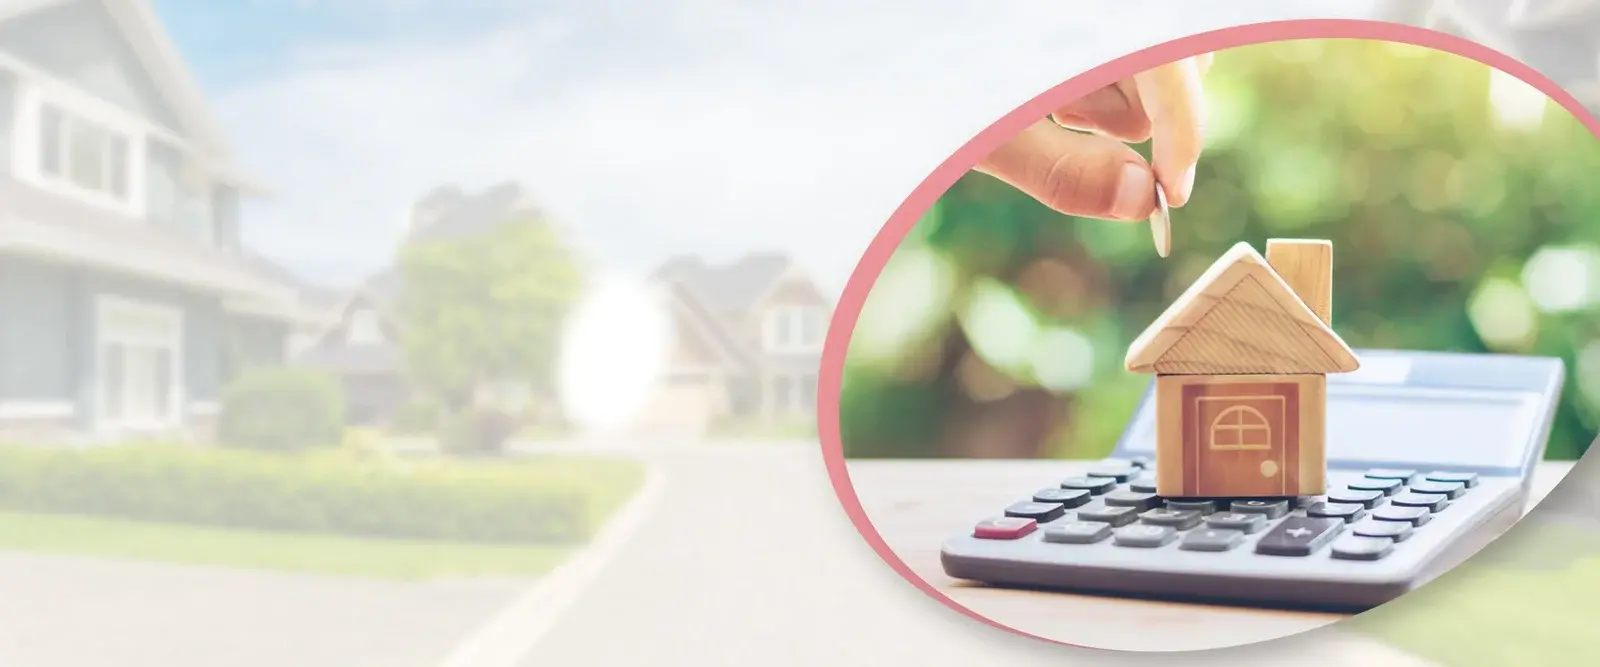 Use Mortgage Calculator by Bob Beach - The Burlington Mortgage Centre to discover the True Cost of Homeownership